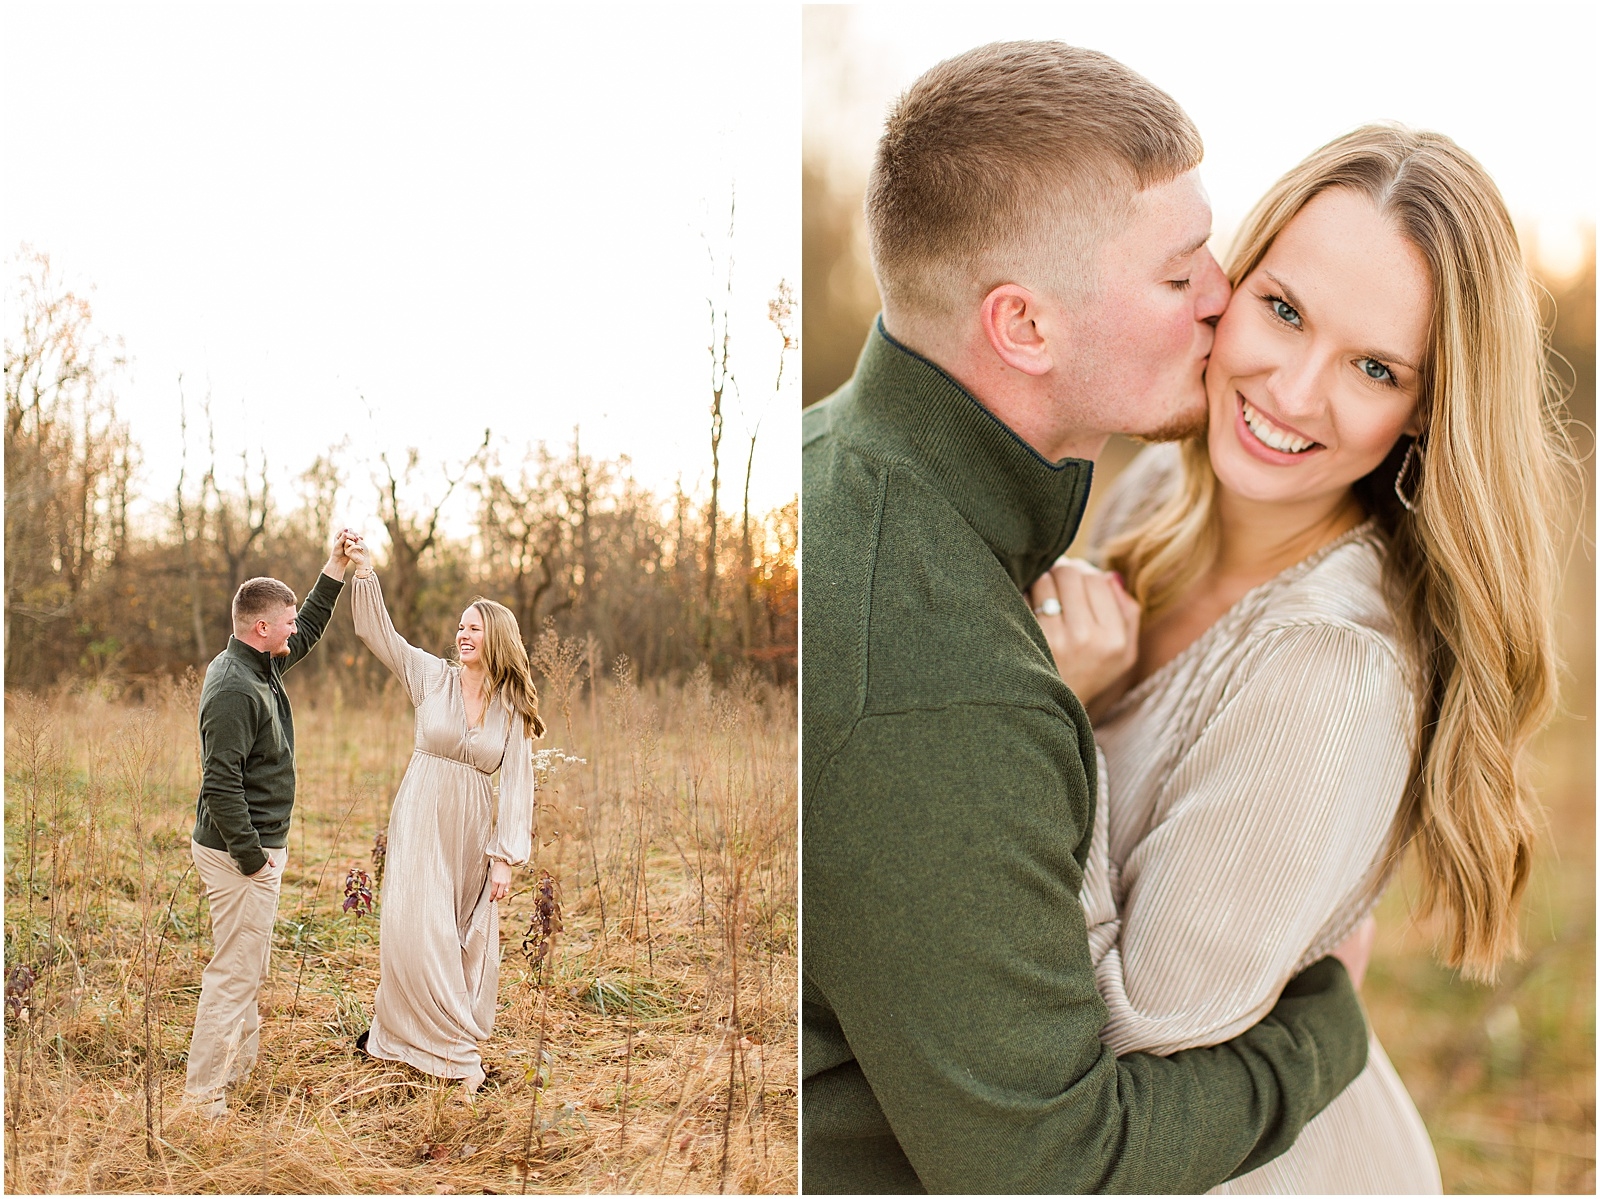 A Fall Southern Indiana Engagement Seesion | Cody and Hannah | Bret and Brandie Photography 047.jpg